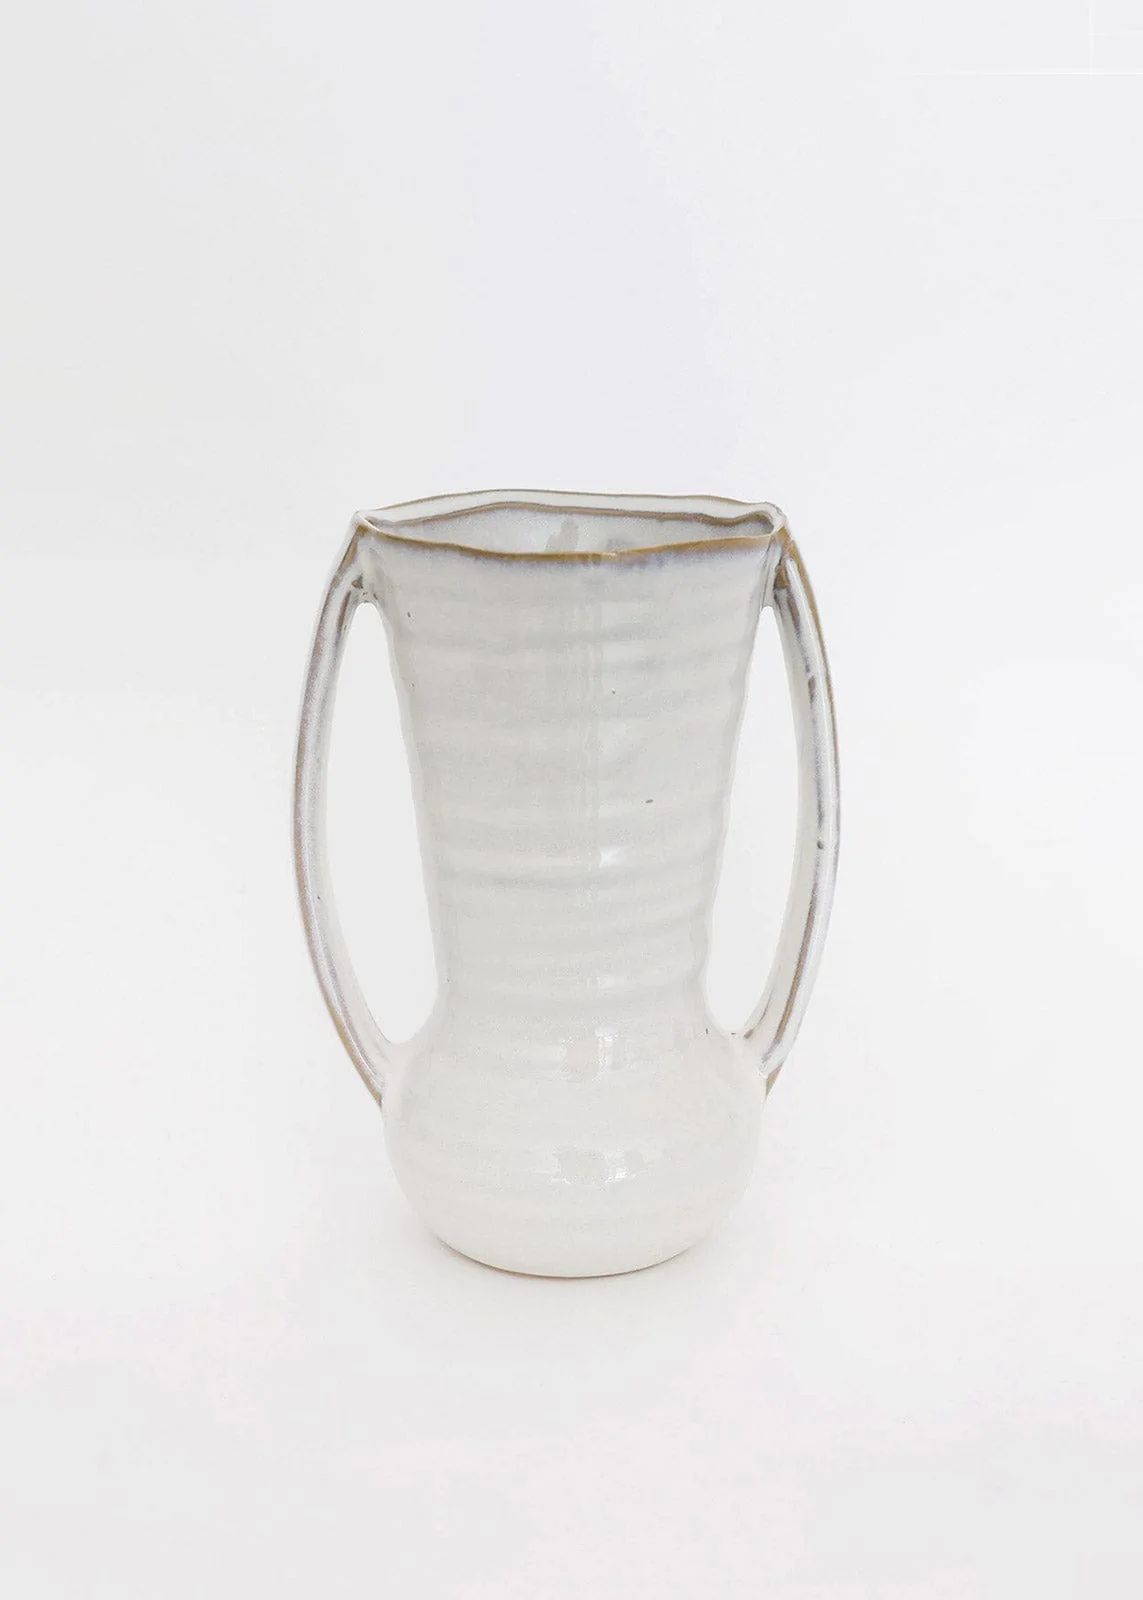 Vanilla Ceramic Vase with Handles - 7.75" Tall | Afloral (US)